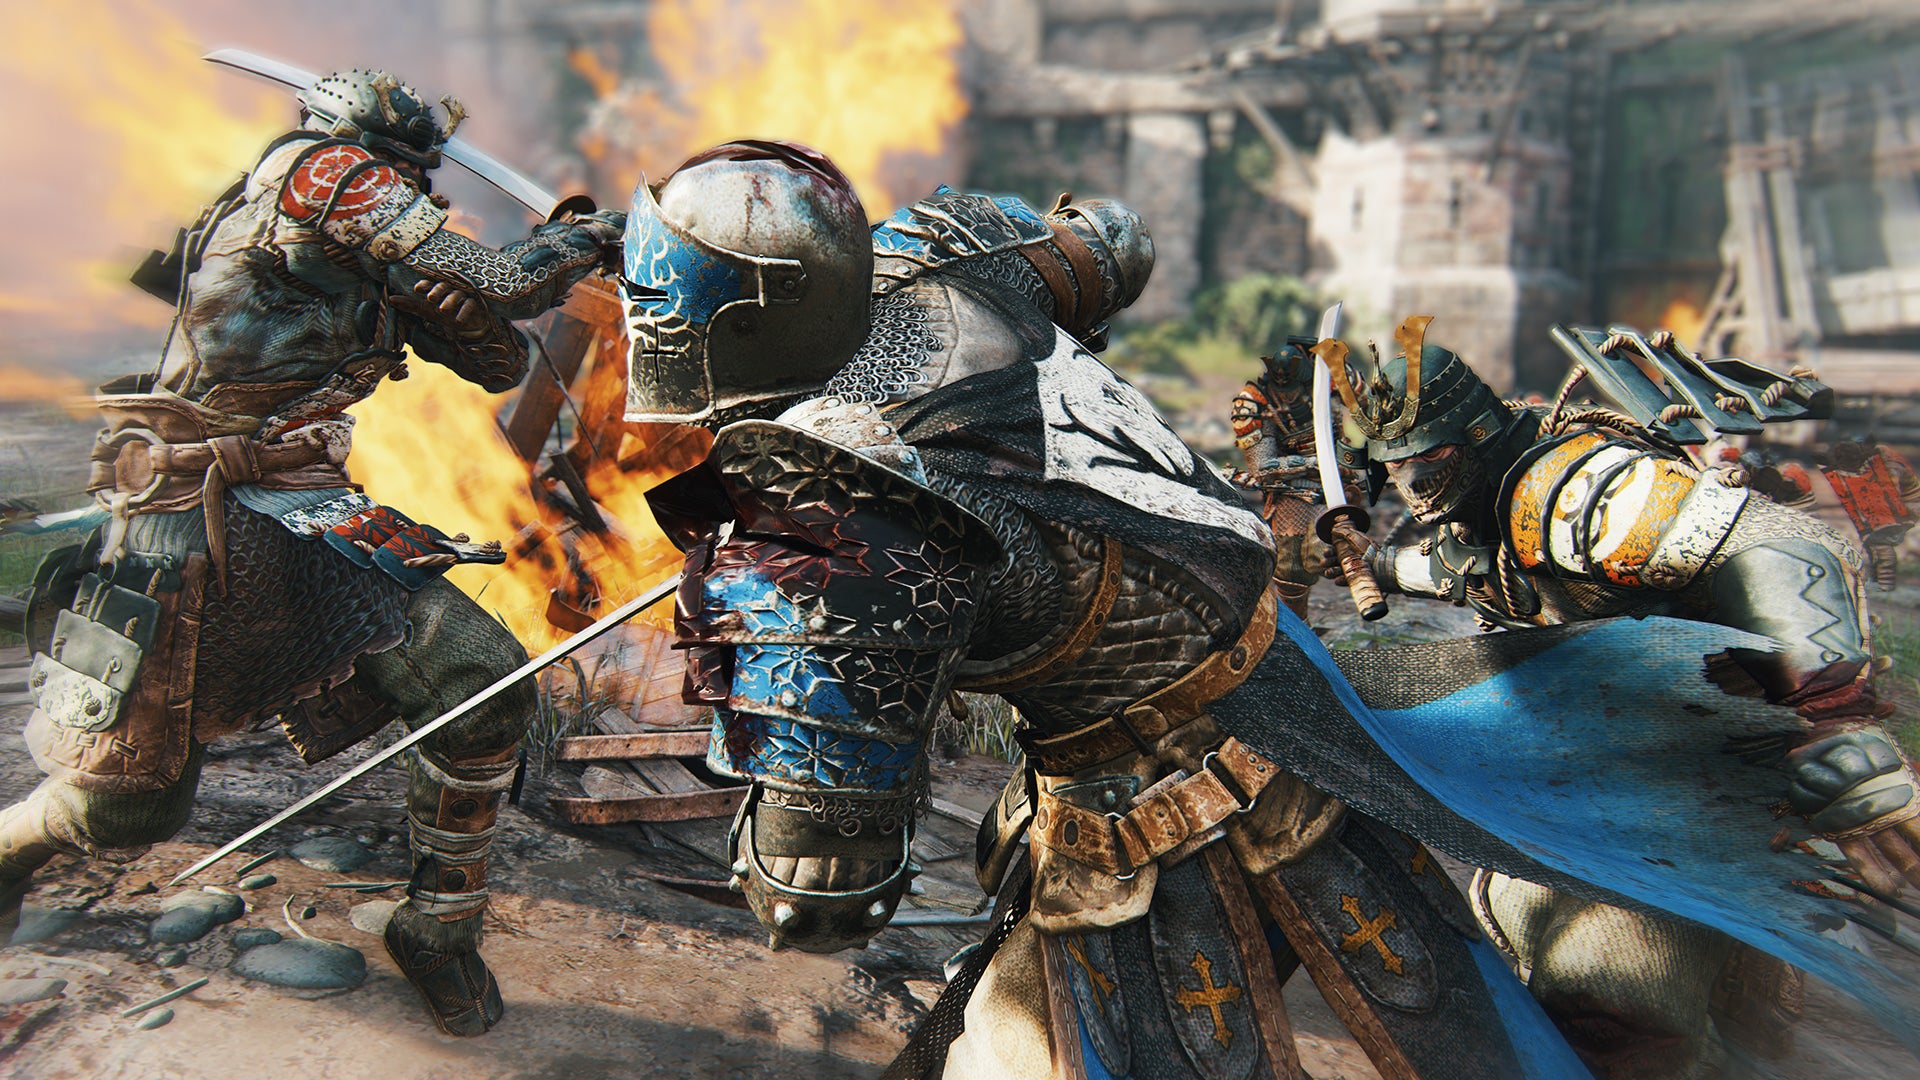 Image for Jelly Deals: For Honor is down to £29.85 in SimplyGames' Spring Clean sale